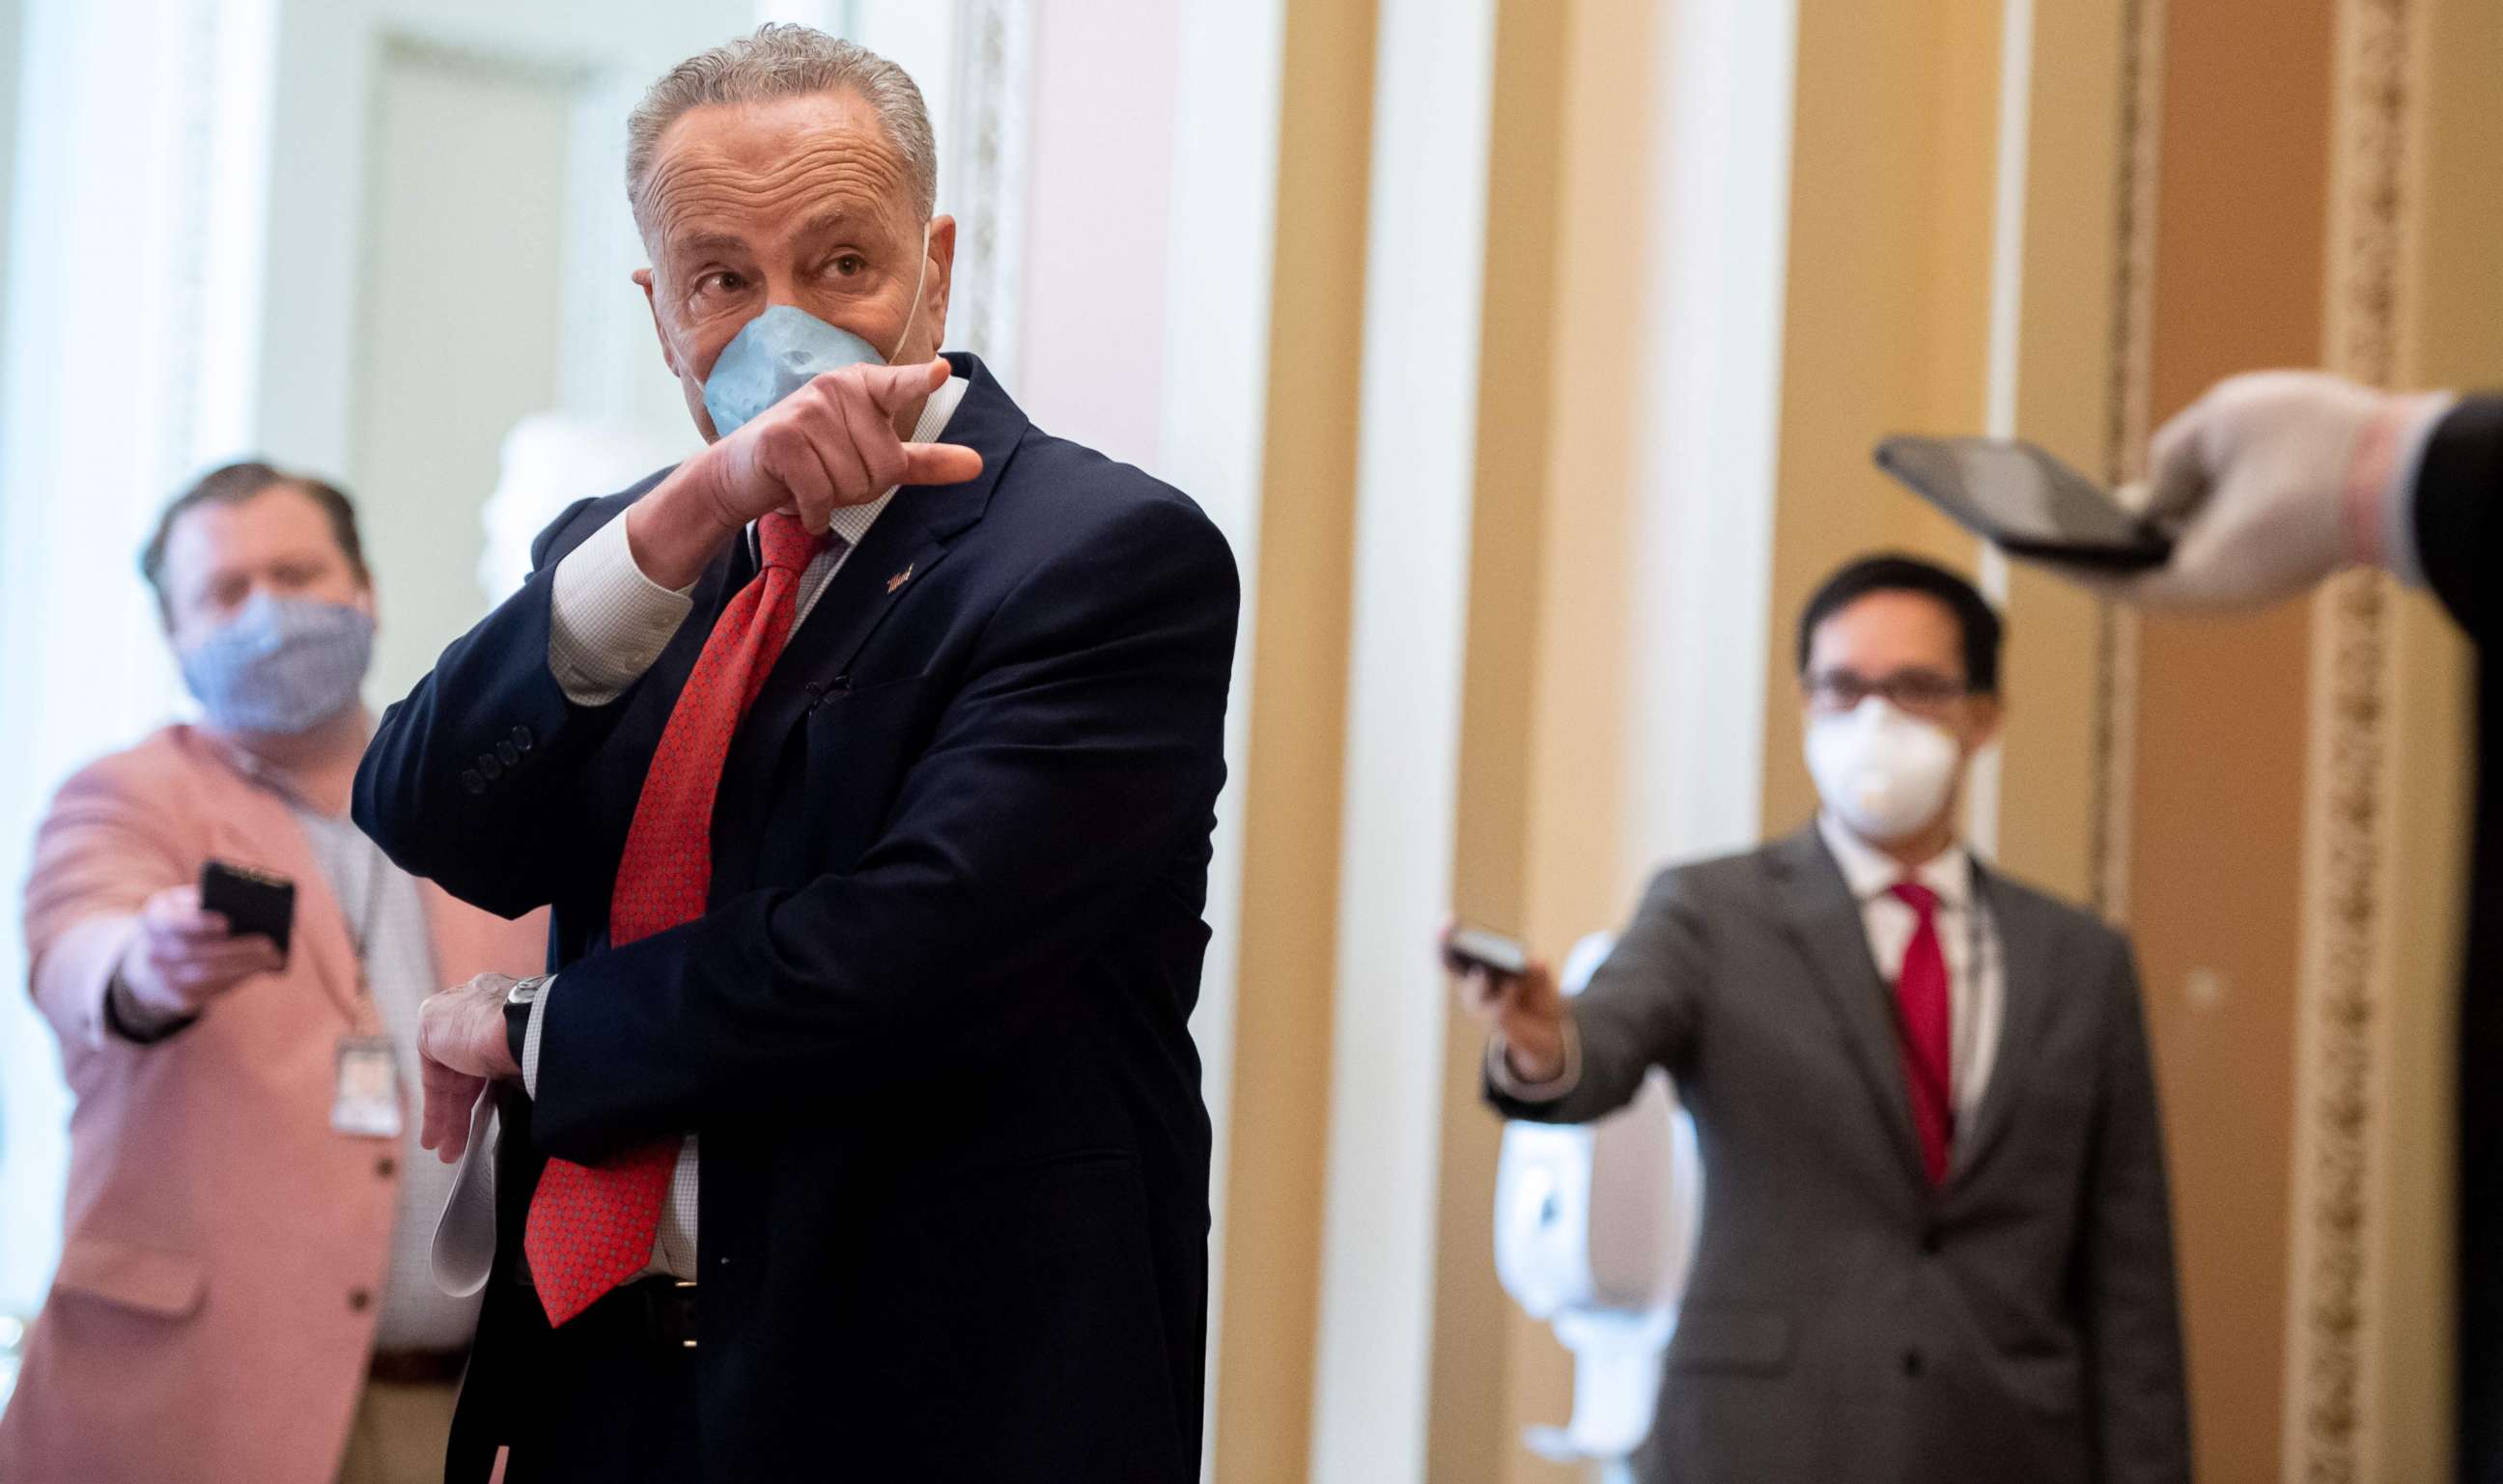 PHOTO: Senate Minority Leader Chuck Schumer wears a mask to protect himself and others from COVID-19 as he speaks to the press as the Senate returns into session at the U.S. Capitol in Washington, May 4, 2020.